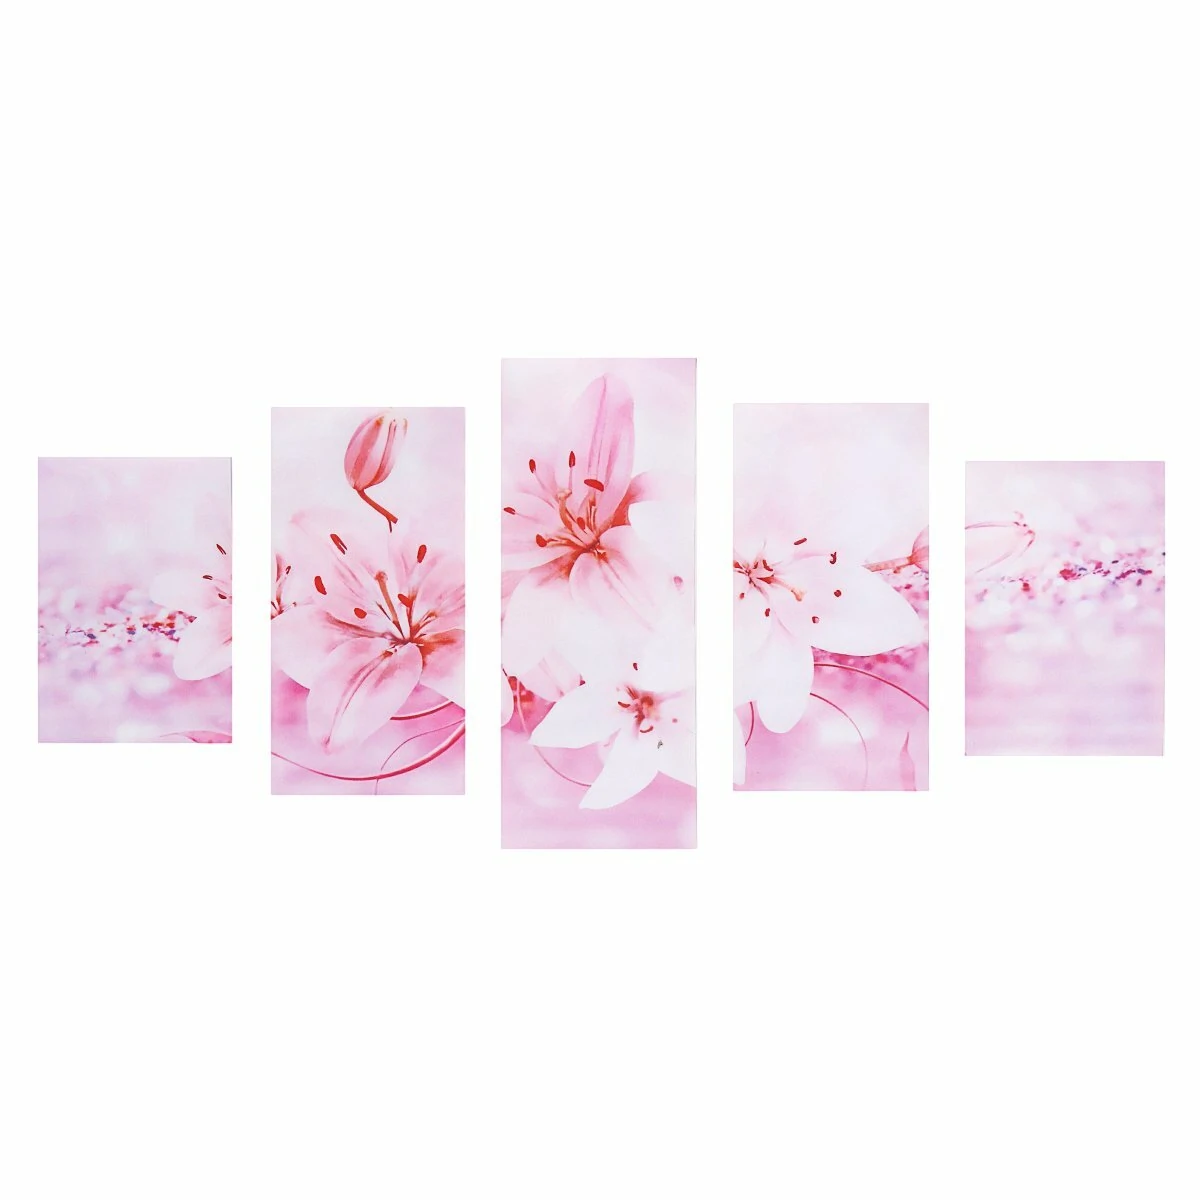 5 pcs wall decorative oil painting canvas print flower wall art pictures frameless wall hanging decorations for home office